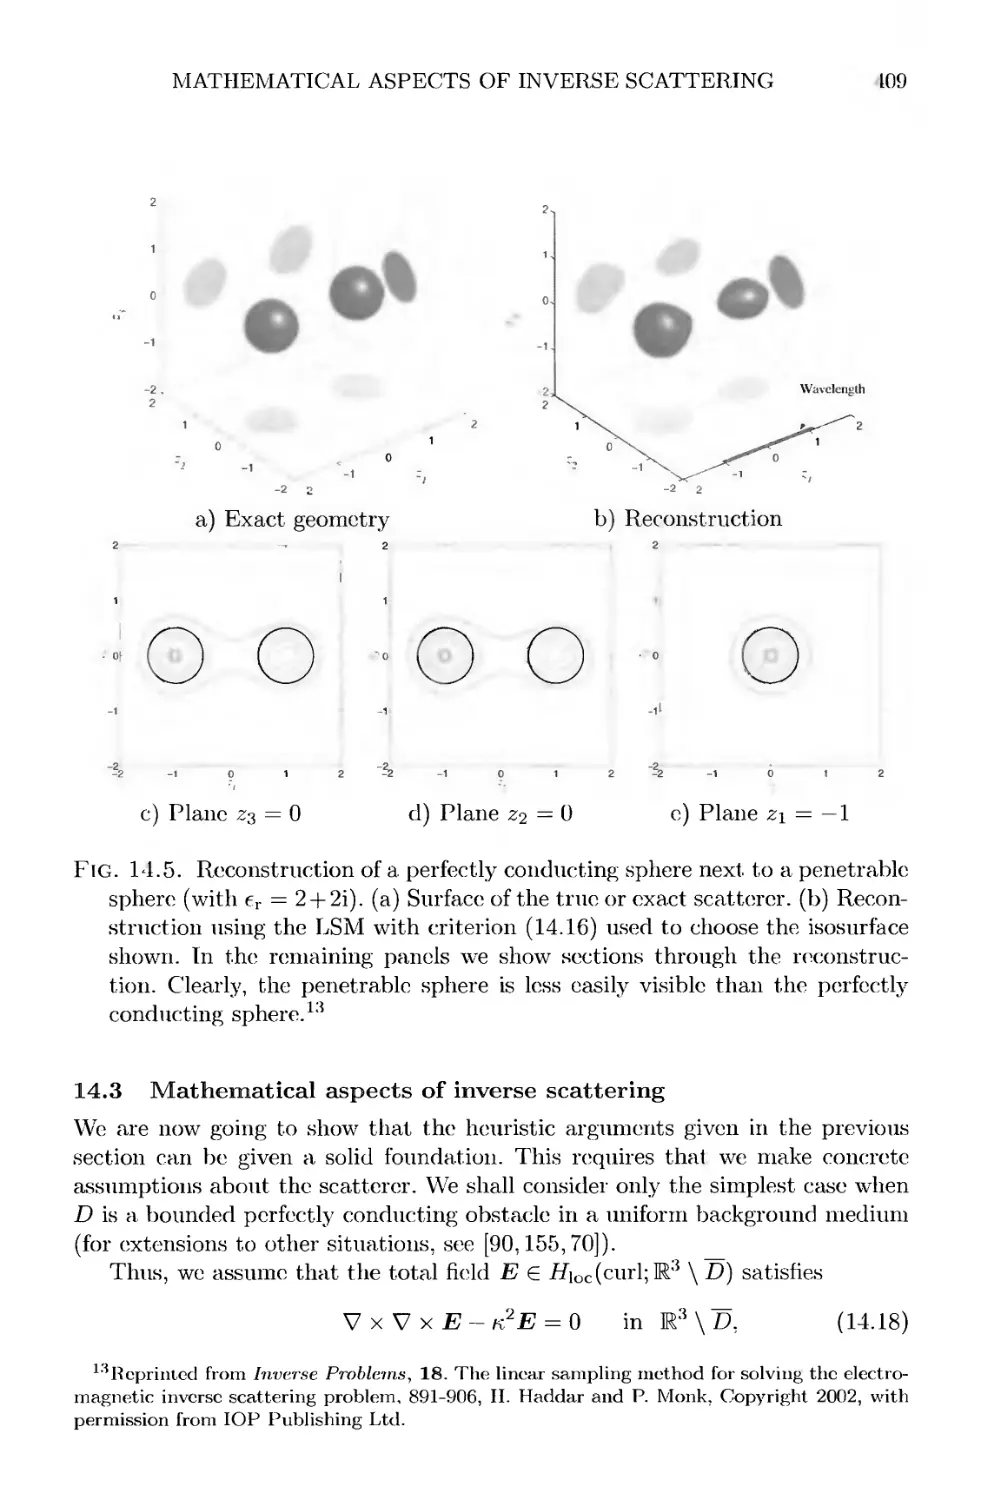 14.3 Mathematical aspects of inverse scattering